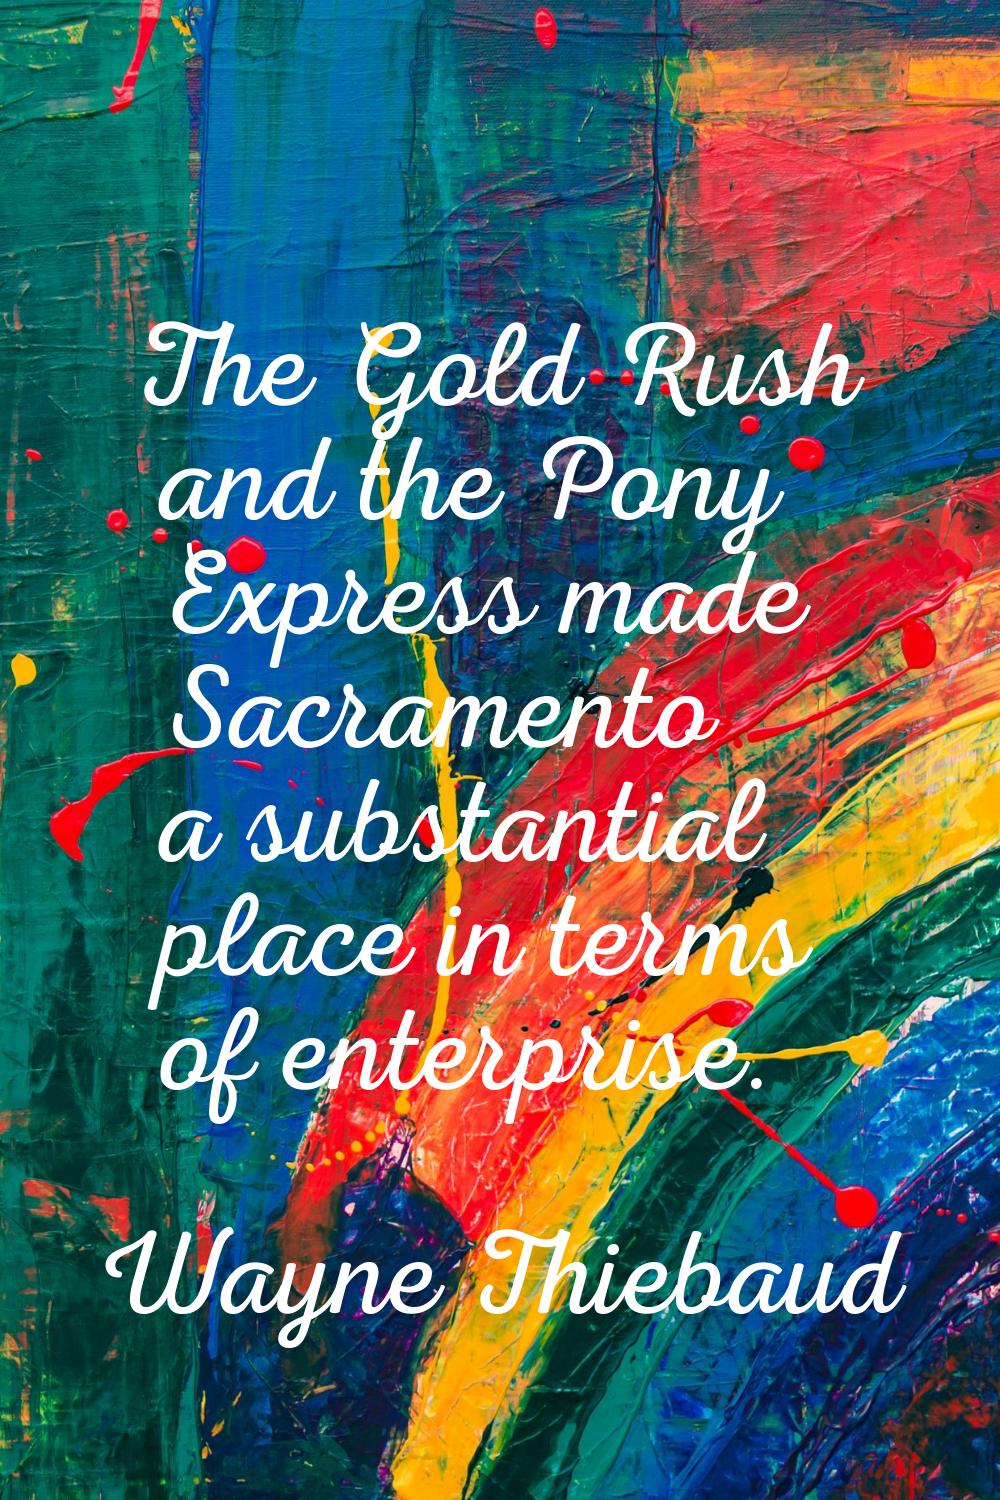 The Gold Rush and the Pony Express made Sacramento a substantial place in terms of enterprise.